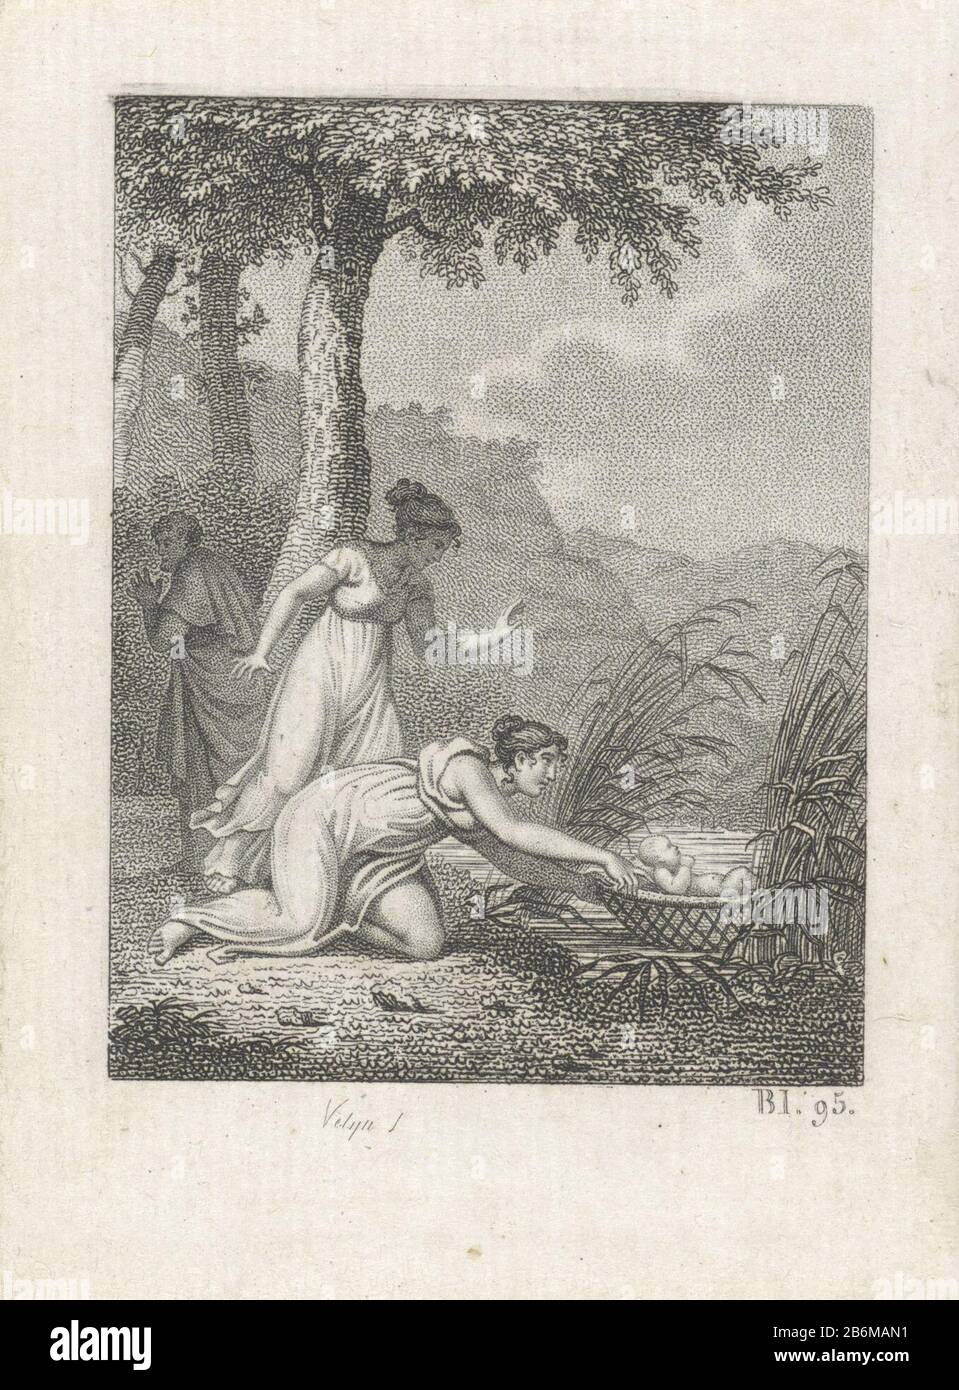 Farao's dochter vindt Mozes in het biezen mandje The daughter of Pharaoh found Moses in the bulrushes basket between the reeds on the bank of the river Nile (Ex. 2: 5). Behind her the second woman in the background a runaway husband. Bottom right: p. 9. Manufacturer : print maker: Philippus Vellum (indicated on object) Place manufacture: The Netherlands Date: 1820 Physical characteristics: etching and stippelets Material: paper Technique: etching / engra (printing process) Measurements: sheet: h 99 mm × b 73 mmToelichtingPrent used as the book illustration in: almanac dedicated to grace and vi Stock Photo